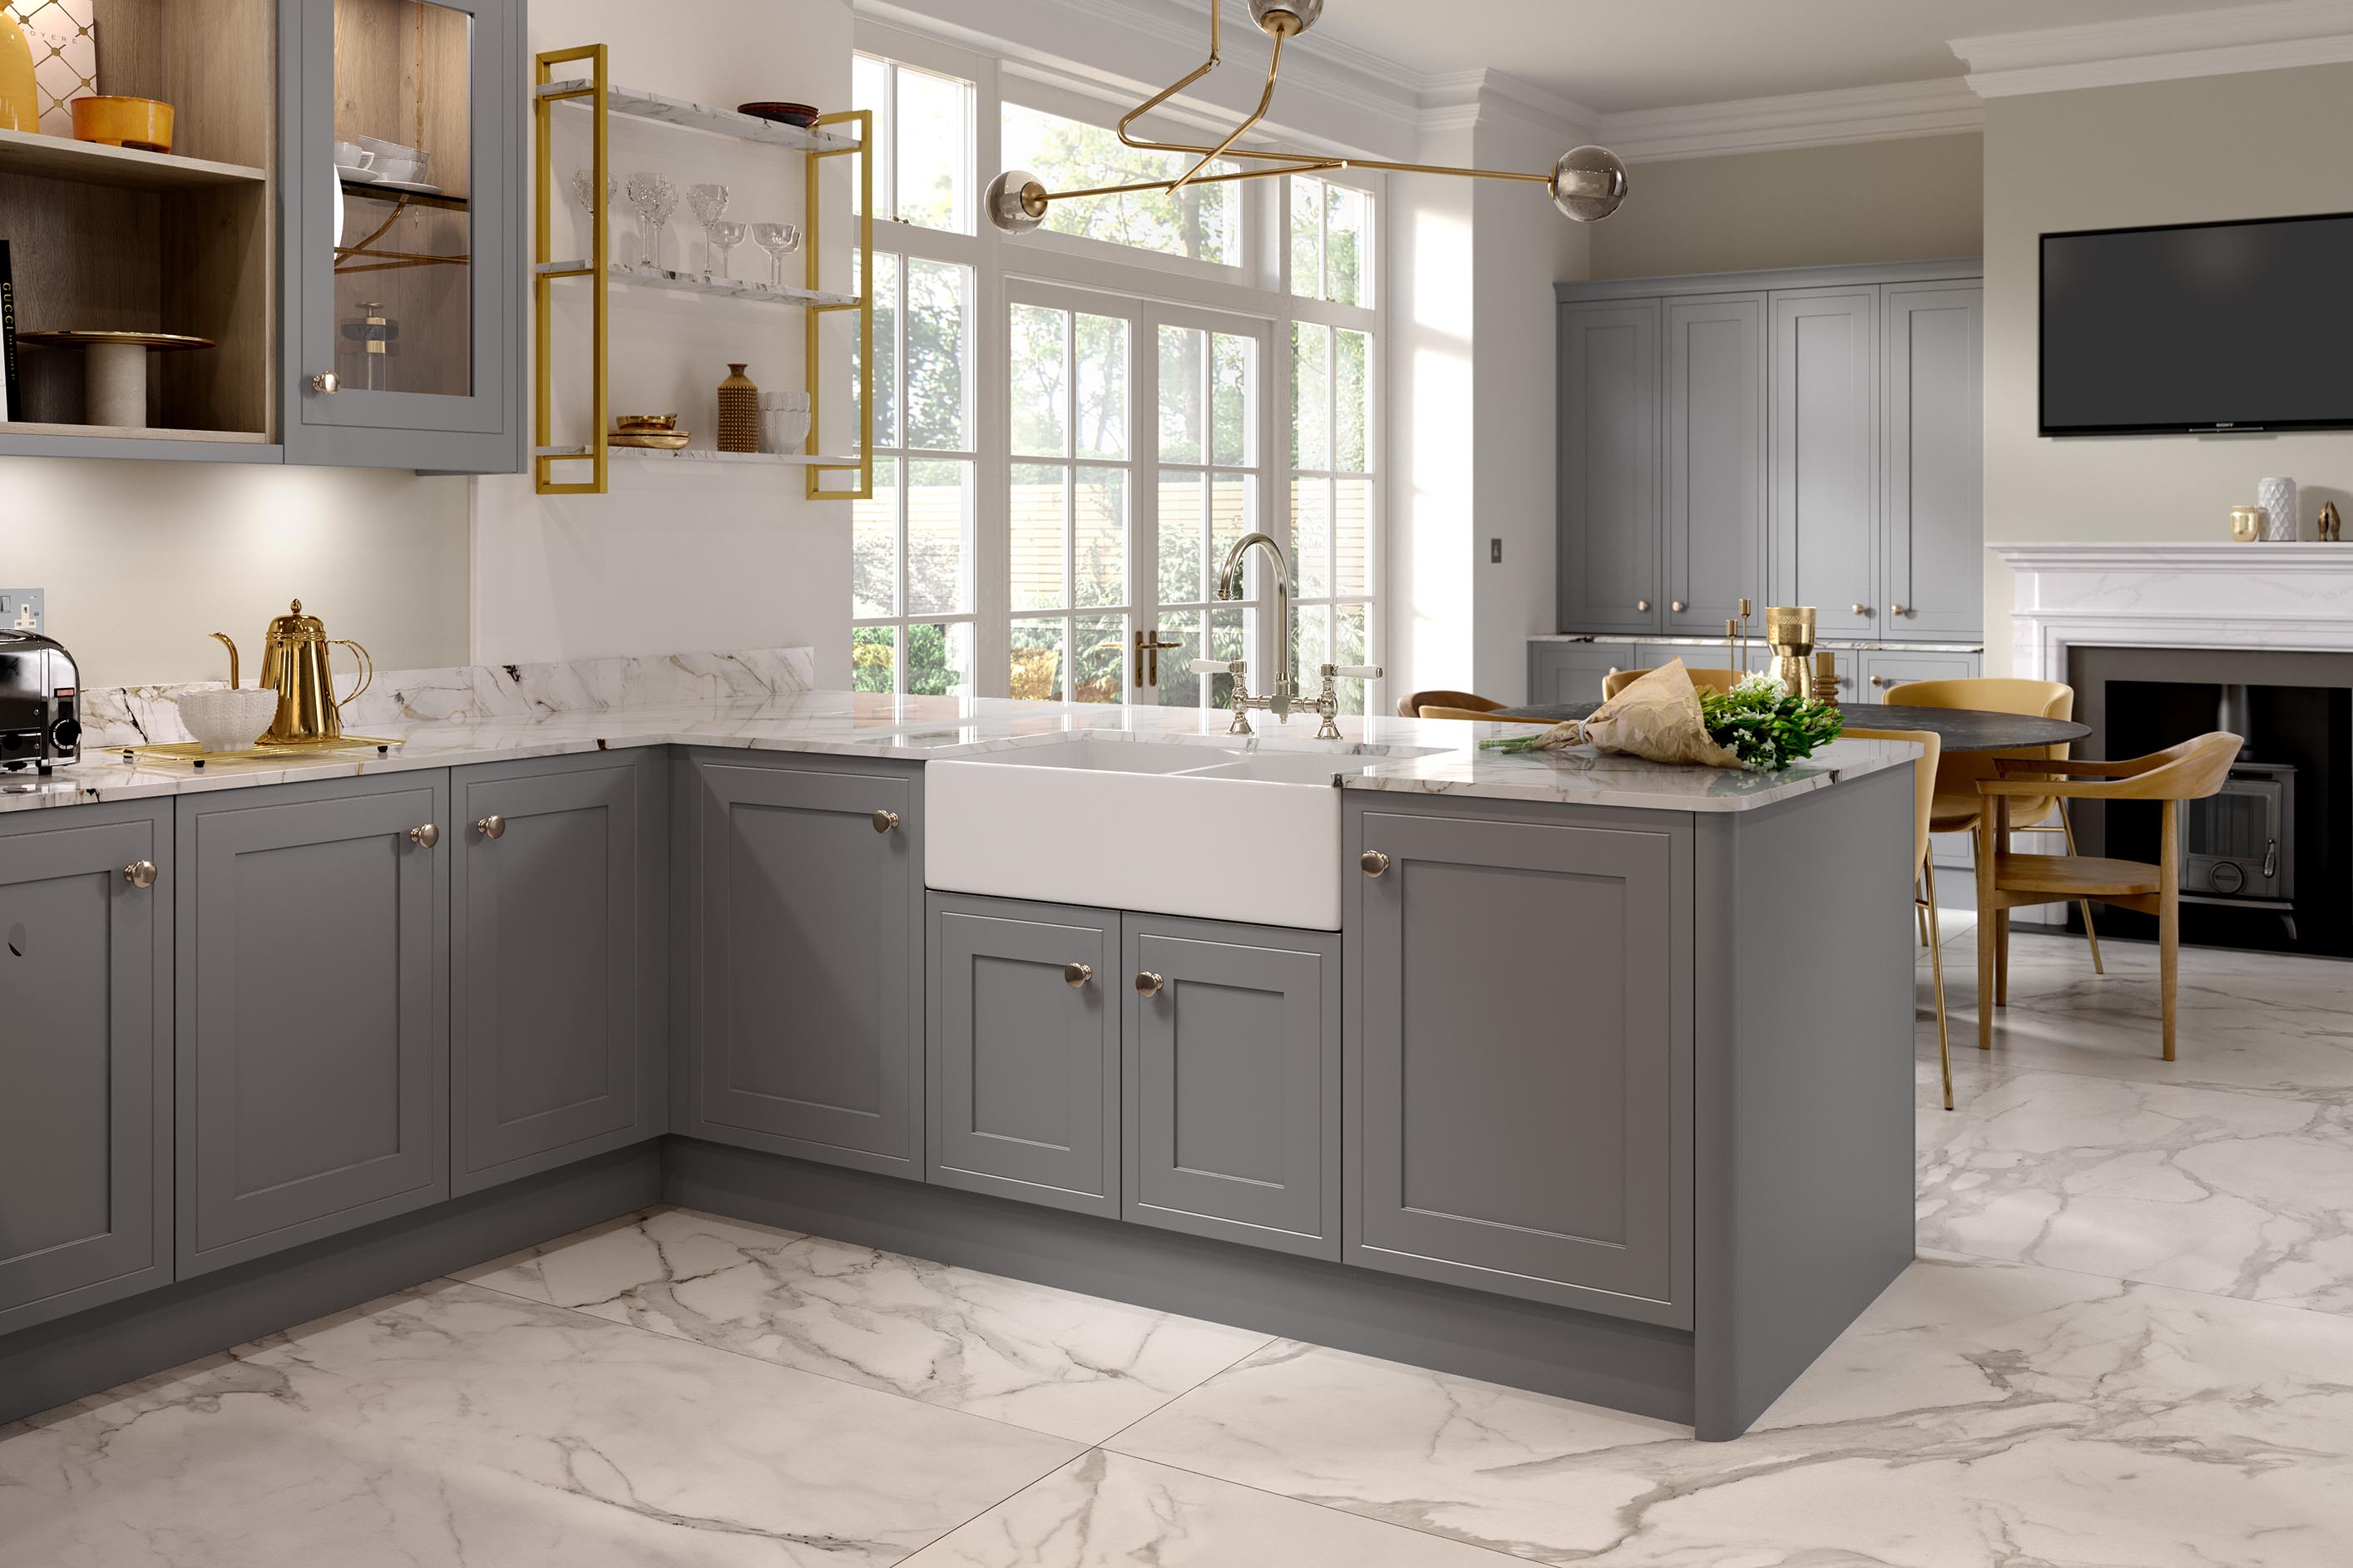 Smooth-finish shaker-style kitchen painted dust grey featuring farmhouse sink